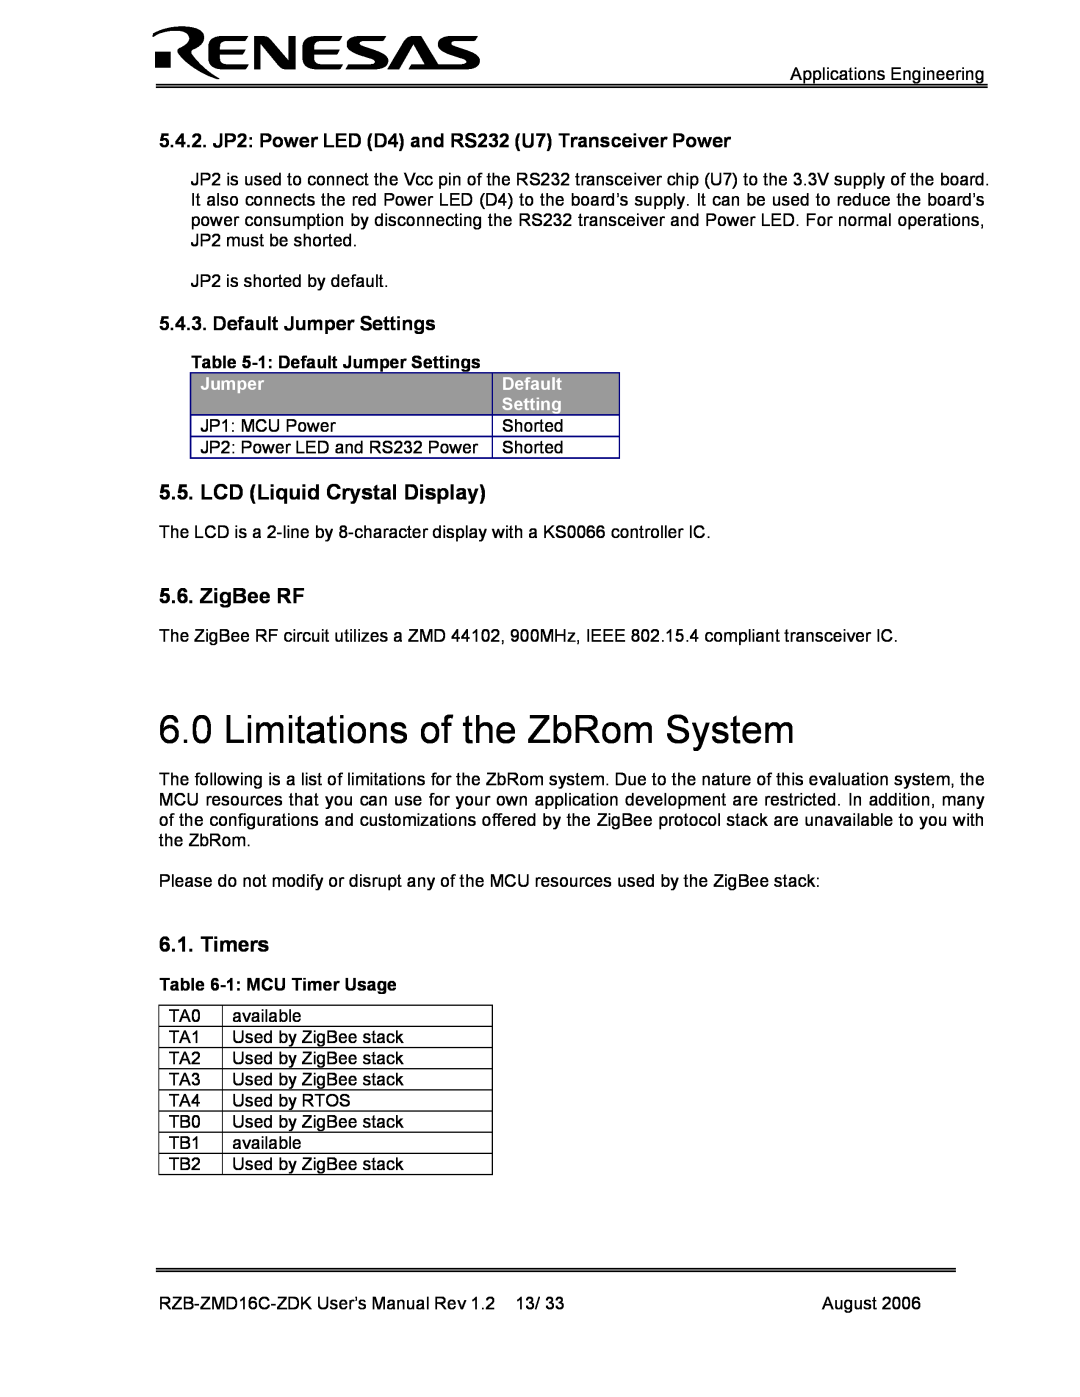 Renesas RZB-ZMD16C-ZDK Limitations of the ZbRom System, LCD Liquid Crystal Display, ZigBee RF, Timers, Jumper, Default 